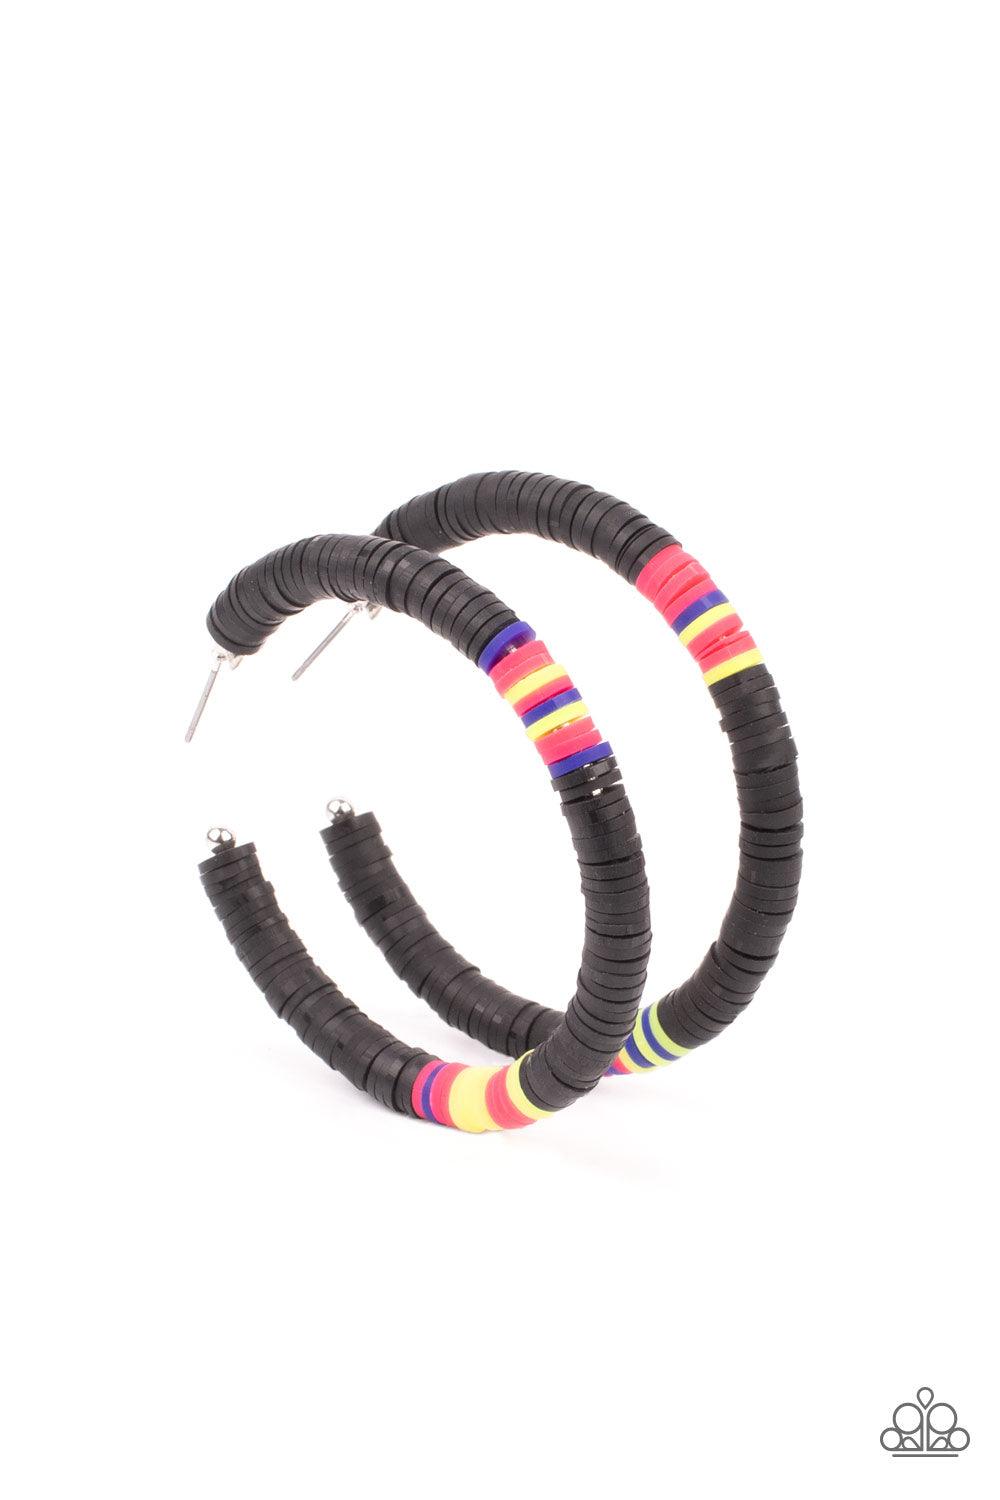 Paparazzi Accessories Colorfully Contagious - Black Rubbery black, pink, blue, and yellow bands are threaded along an oversized silver hoop, creating a courageous pop of color. Earring attaches to a standard post fitting. Hoop measures approximately 2 1/4